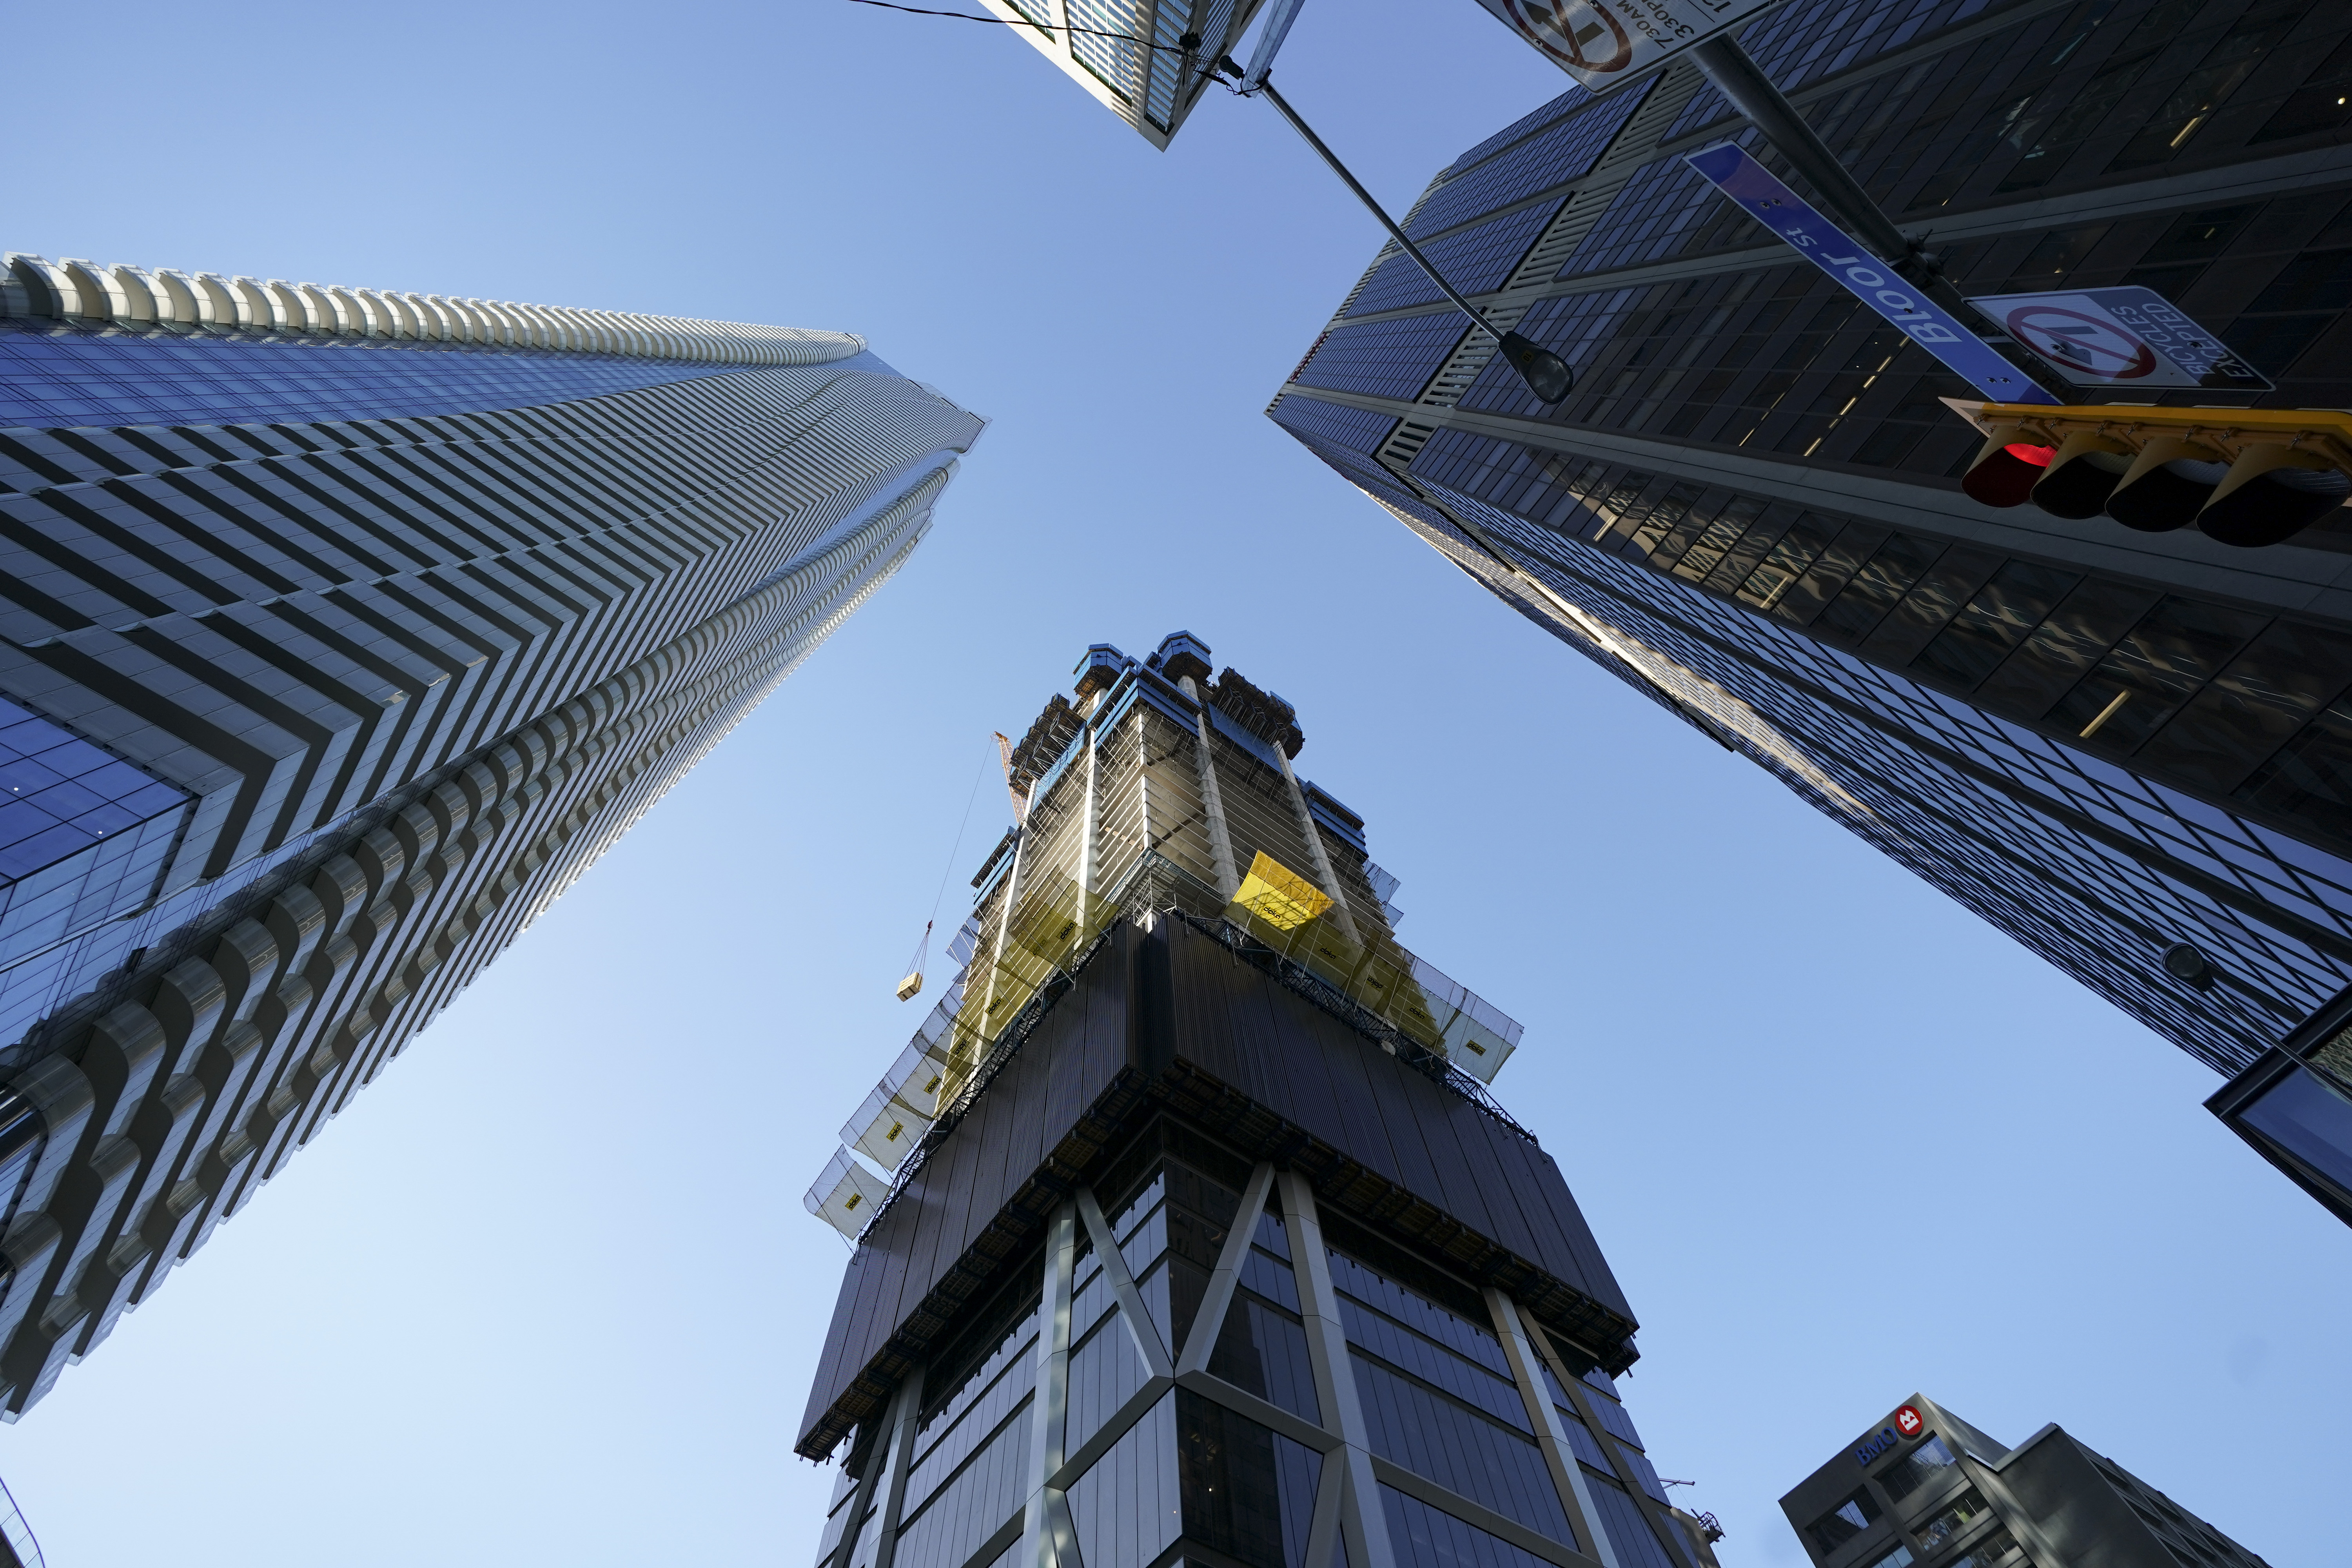 As projects stall, real estate receiverships are on the rise in Canada